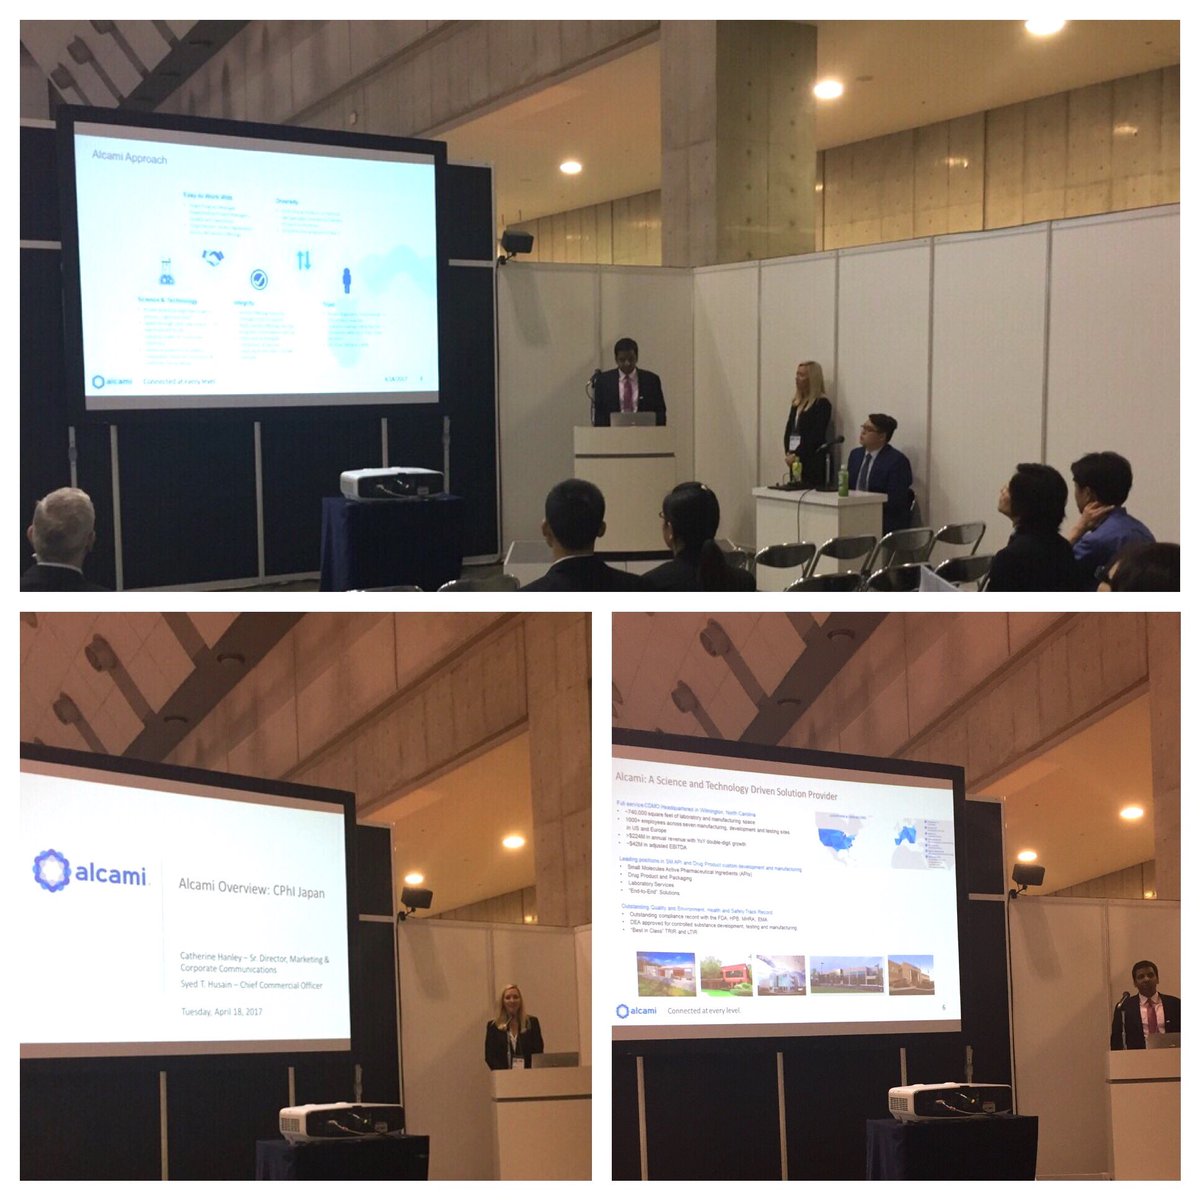 Alcami presented on Wed, Apr 19 at #CPhIJapan in Tokyo. Visit us at booth T-10 this week to talk further with our team! #alcamiadvantage